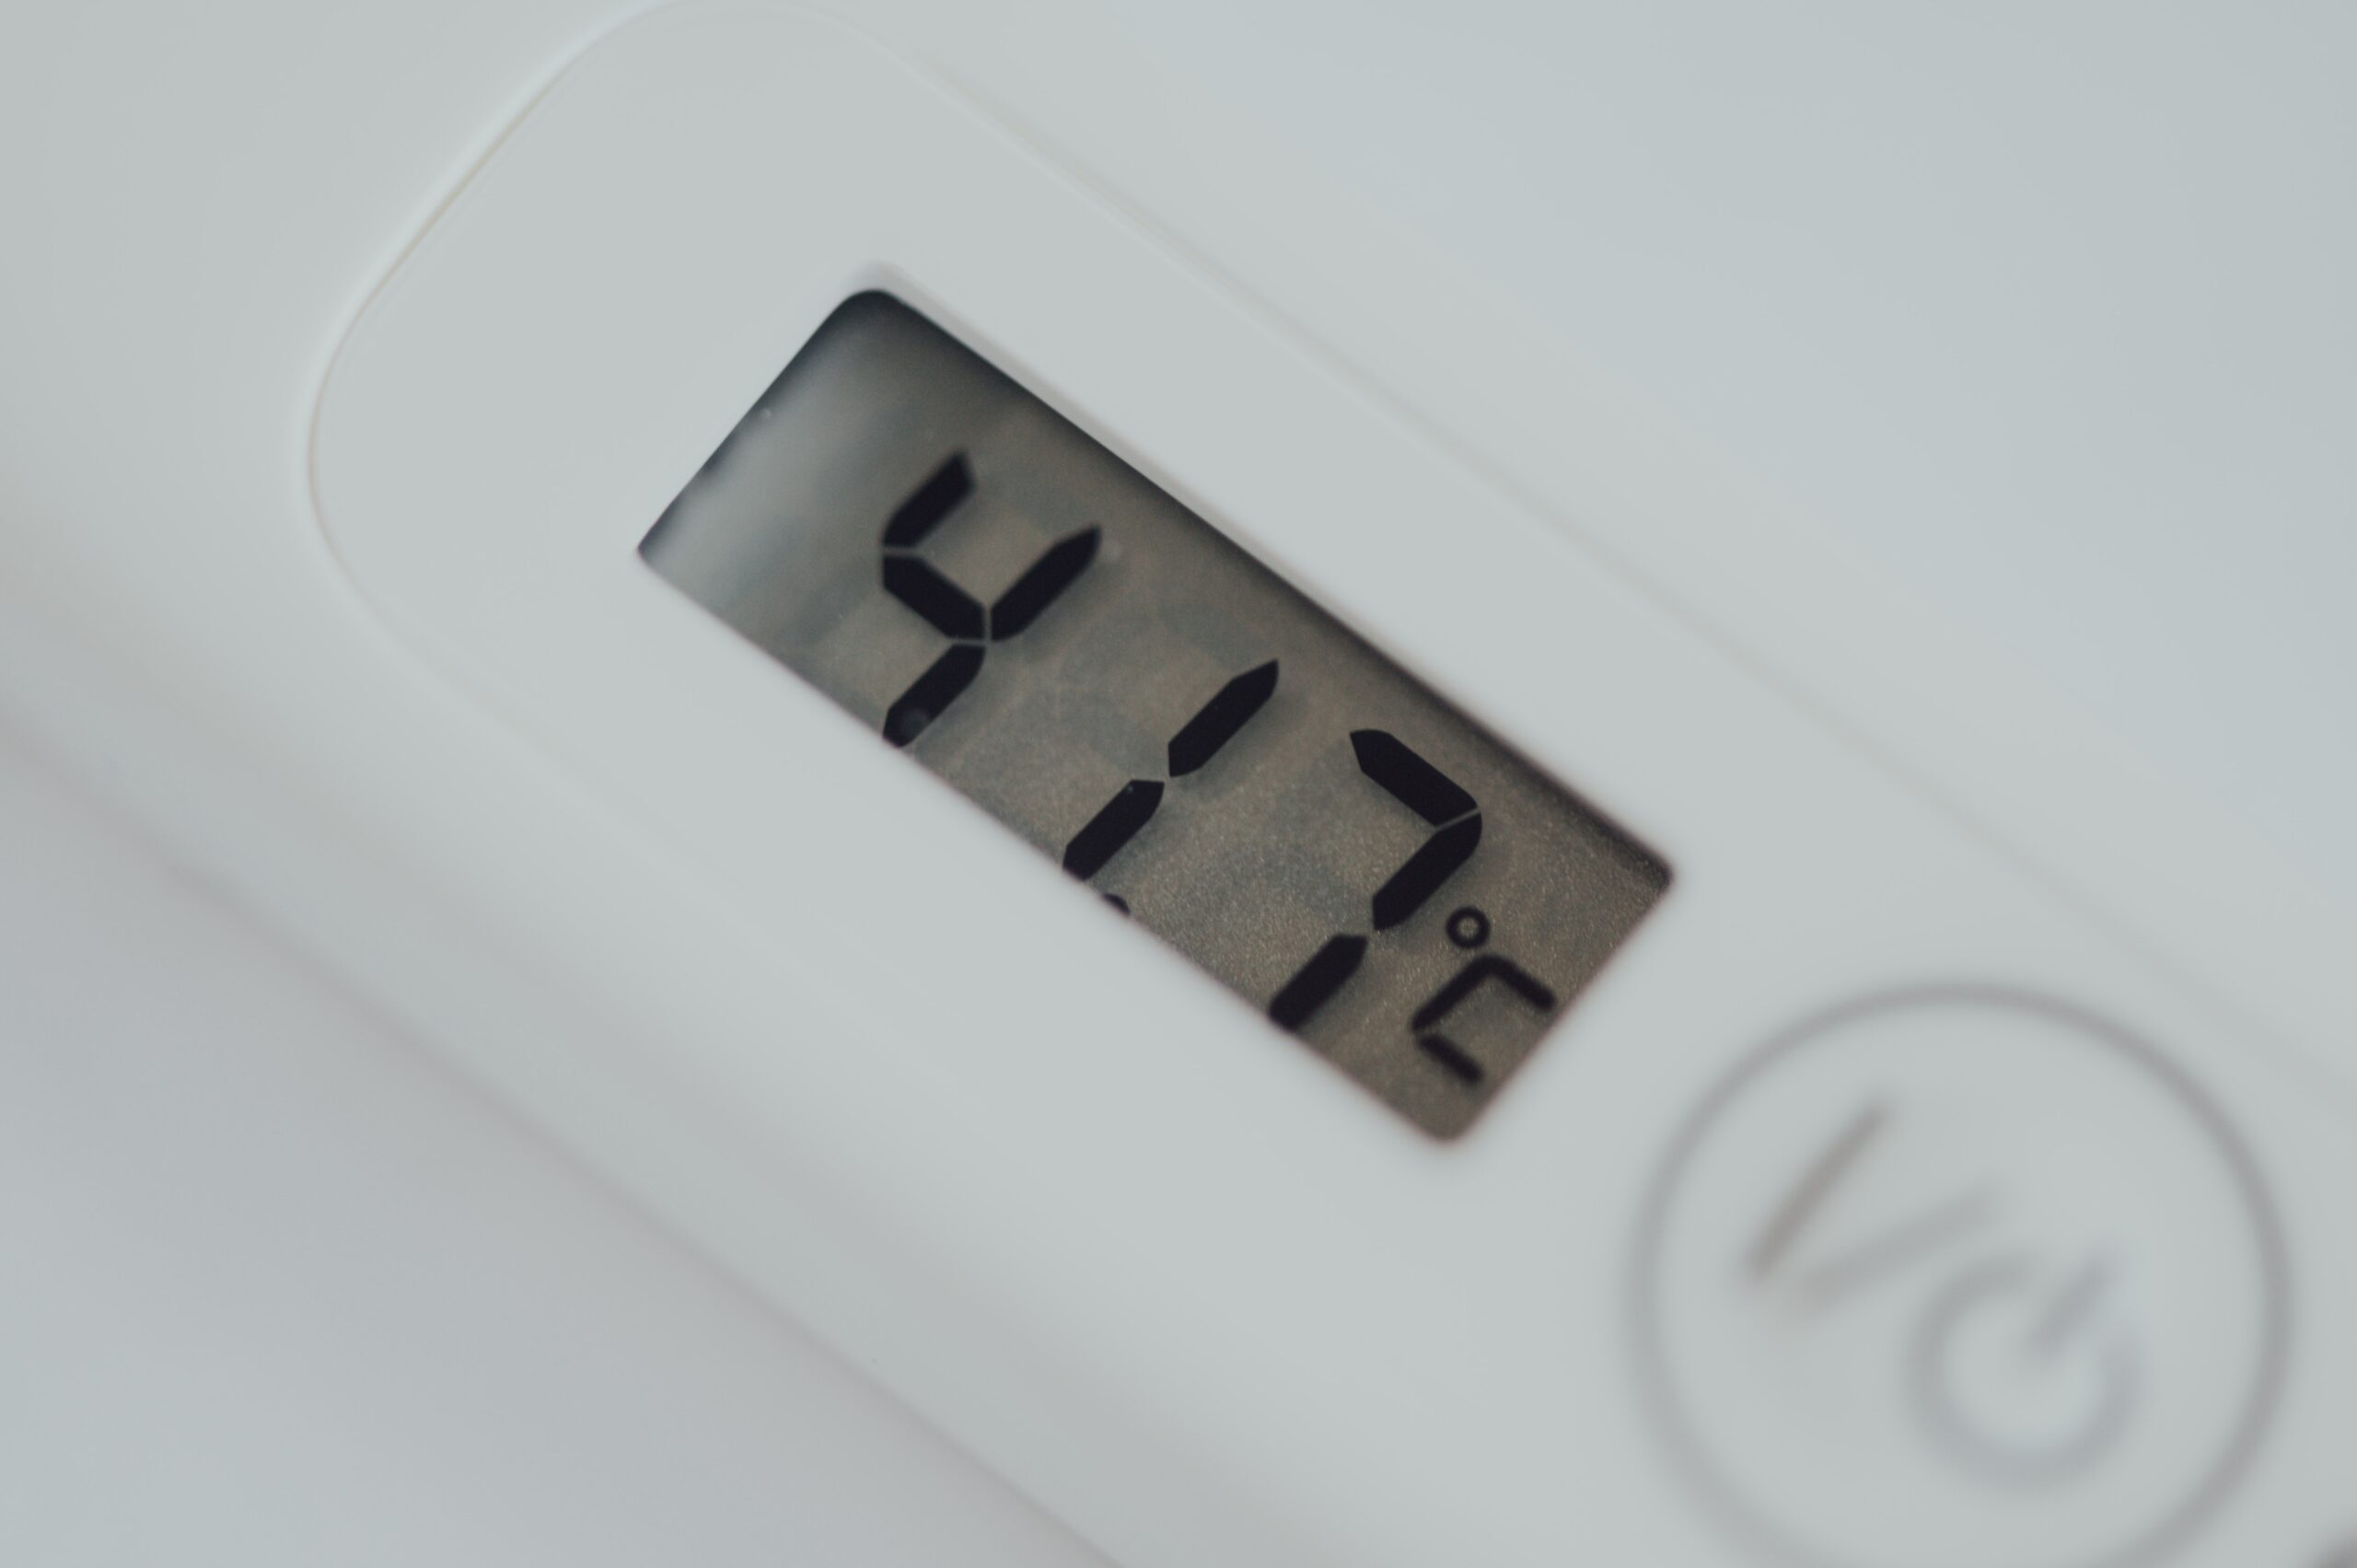 Thermometer showing a high temperature of 41.7 degrees Celsius.